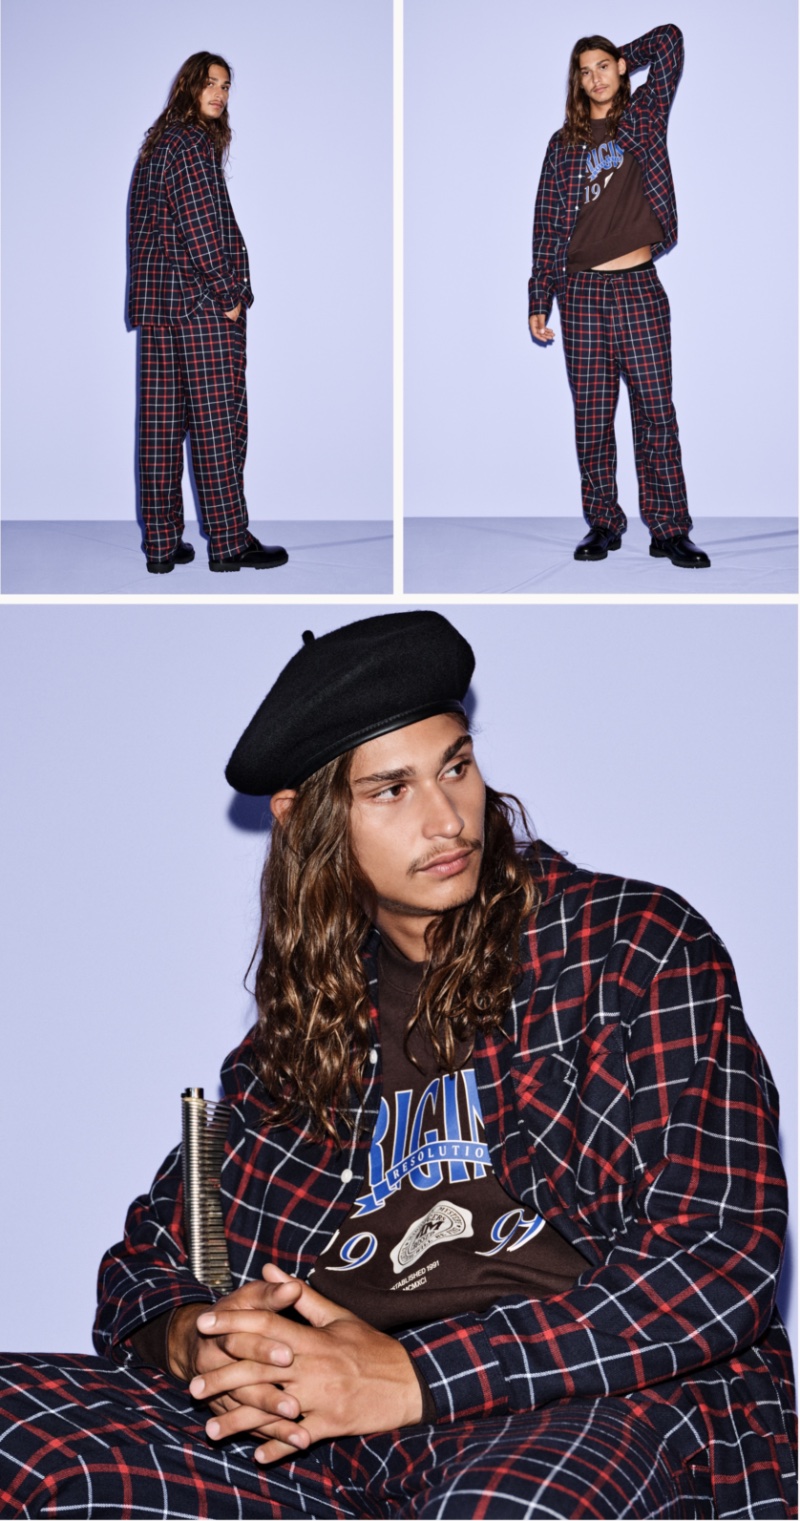 Hudson Primo embraces street style in a winter plaid look.